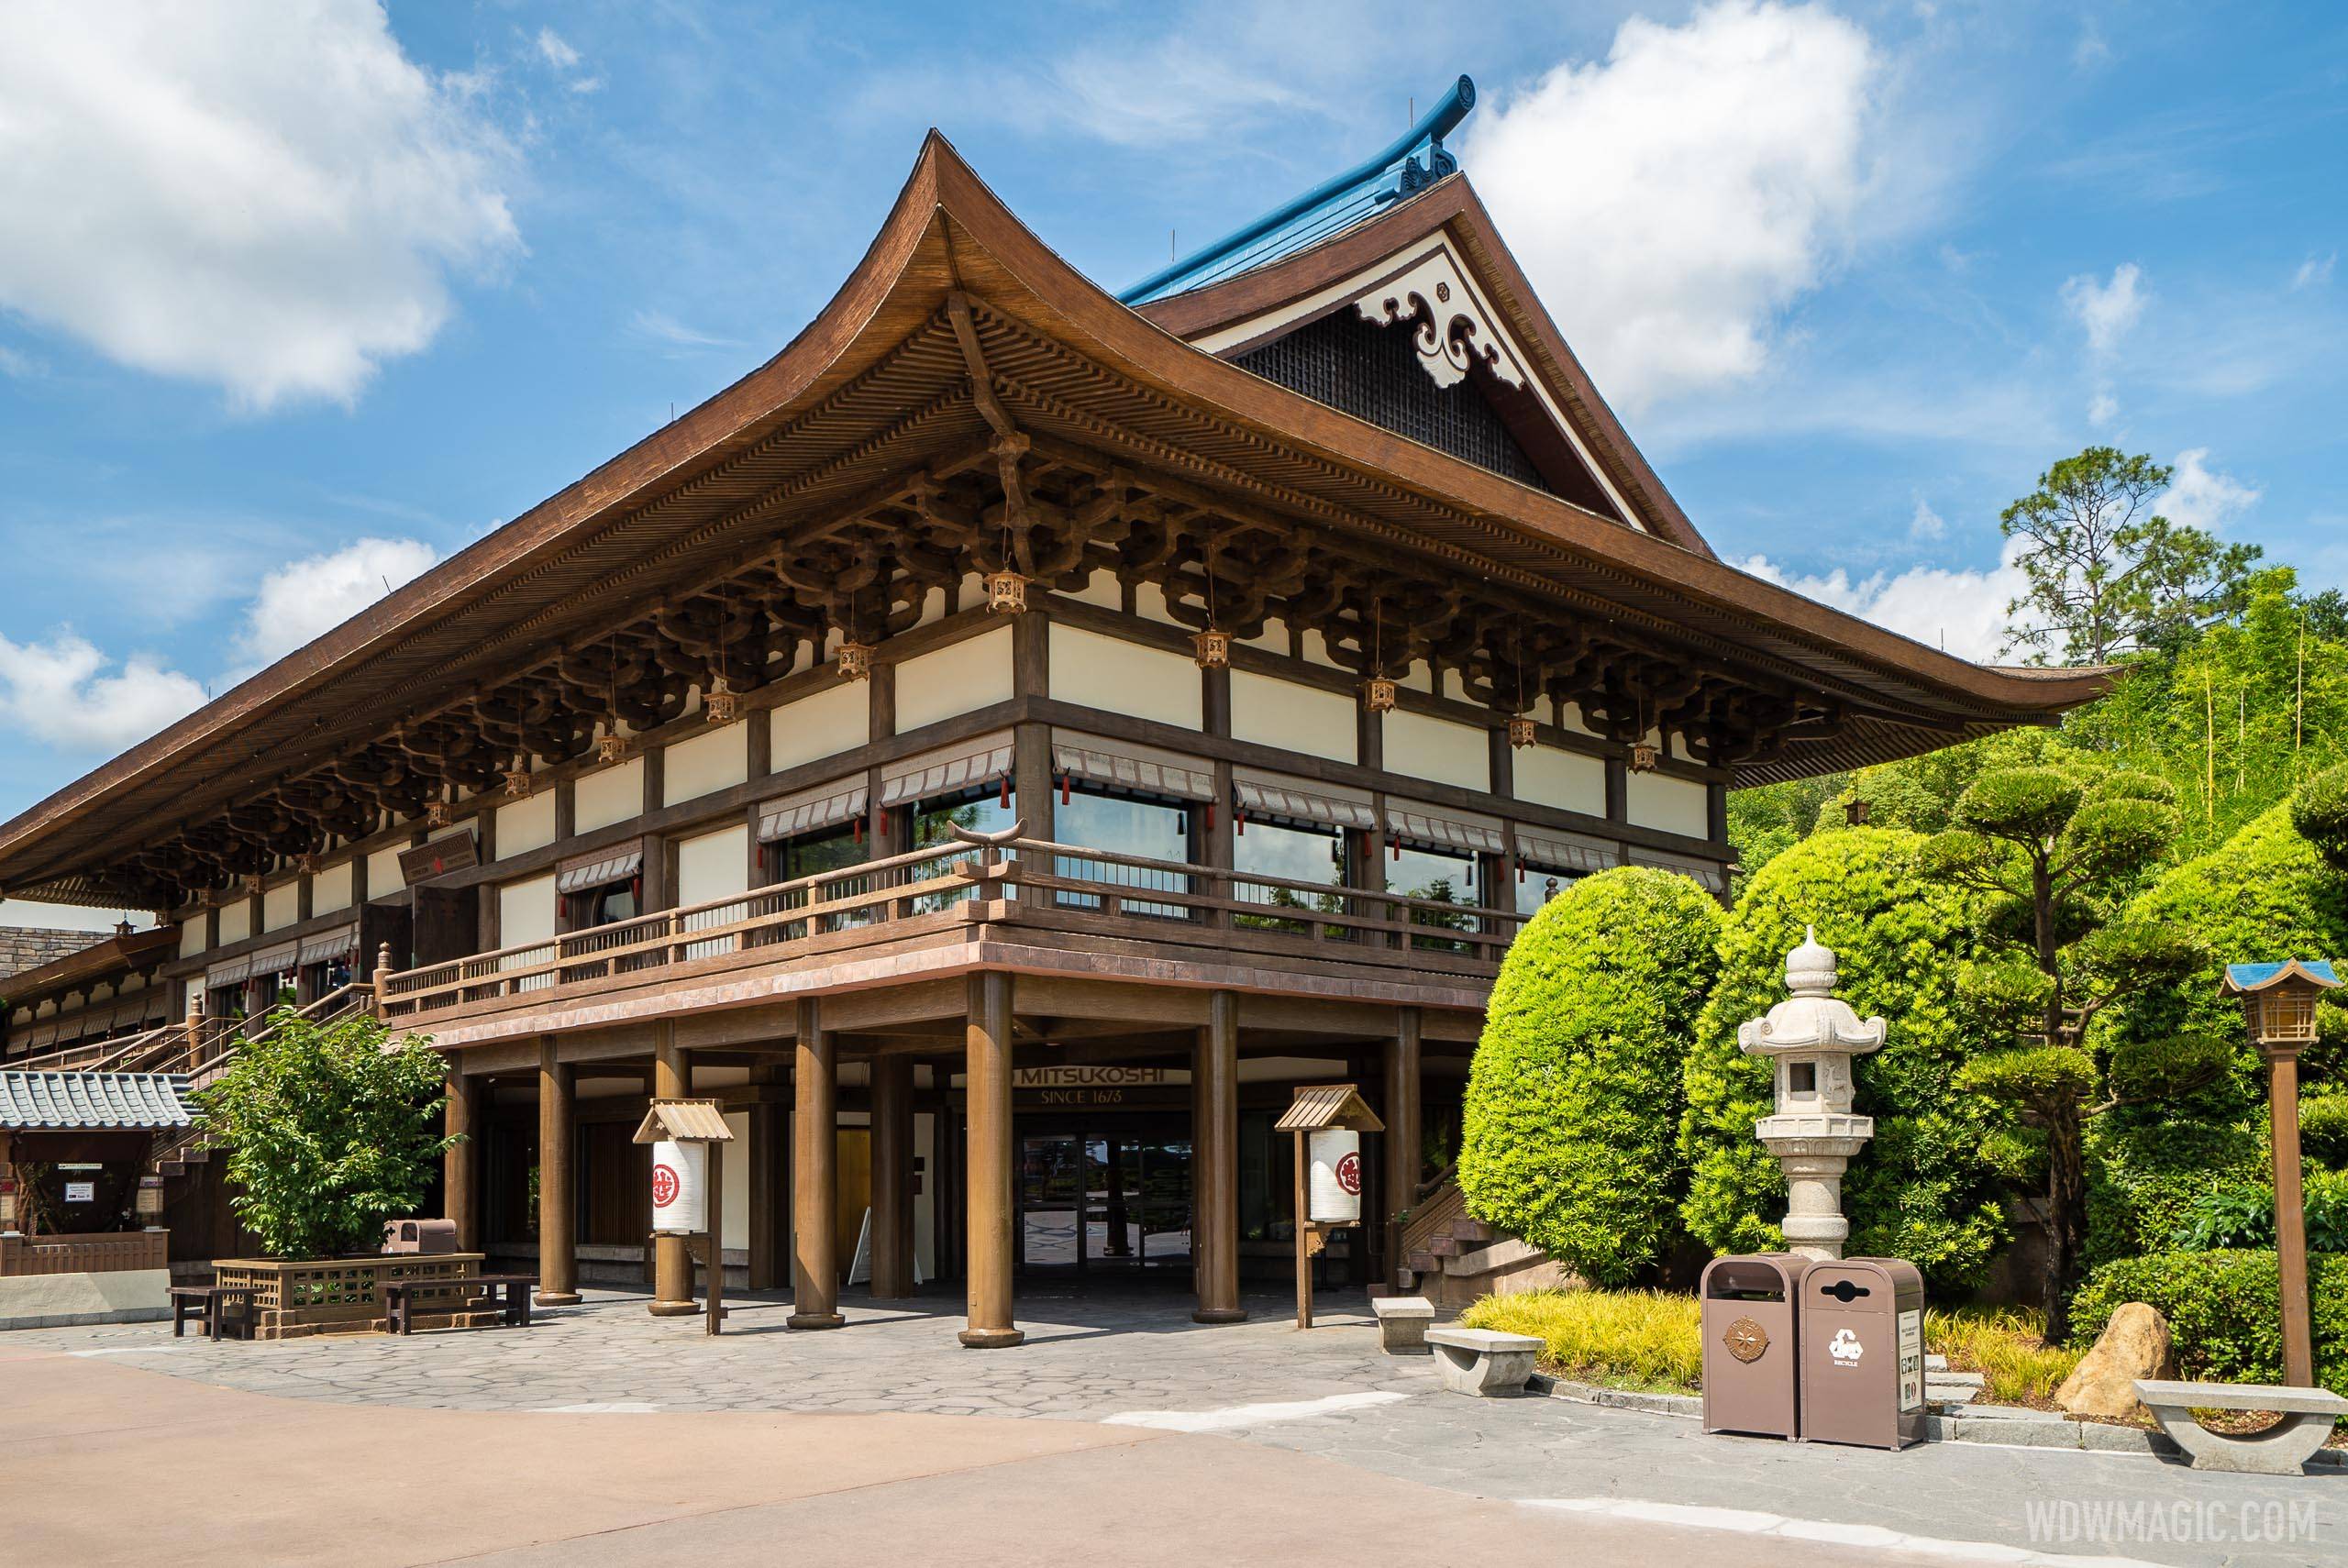 Teppan-Edo is located on the second floor of the Mitsukoshi department store at the Japan Pavilion